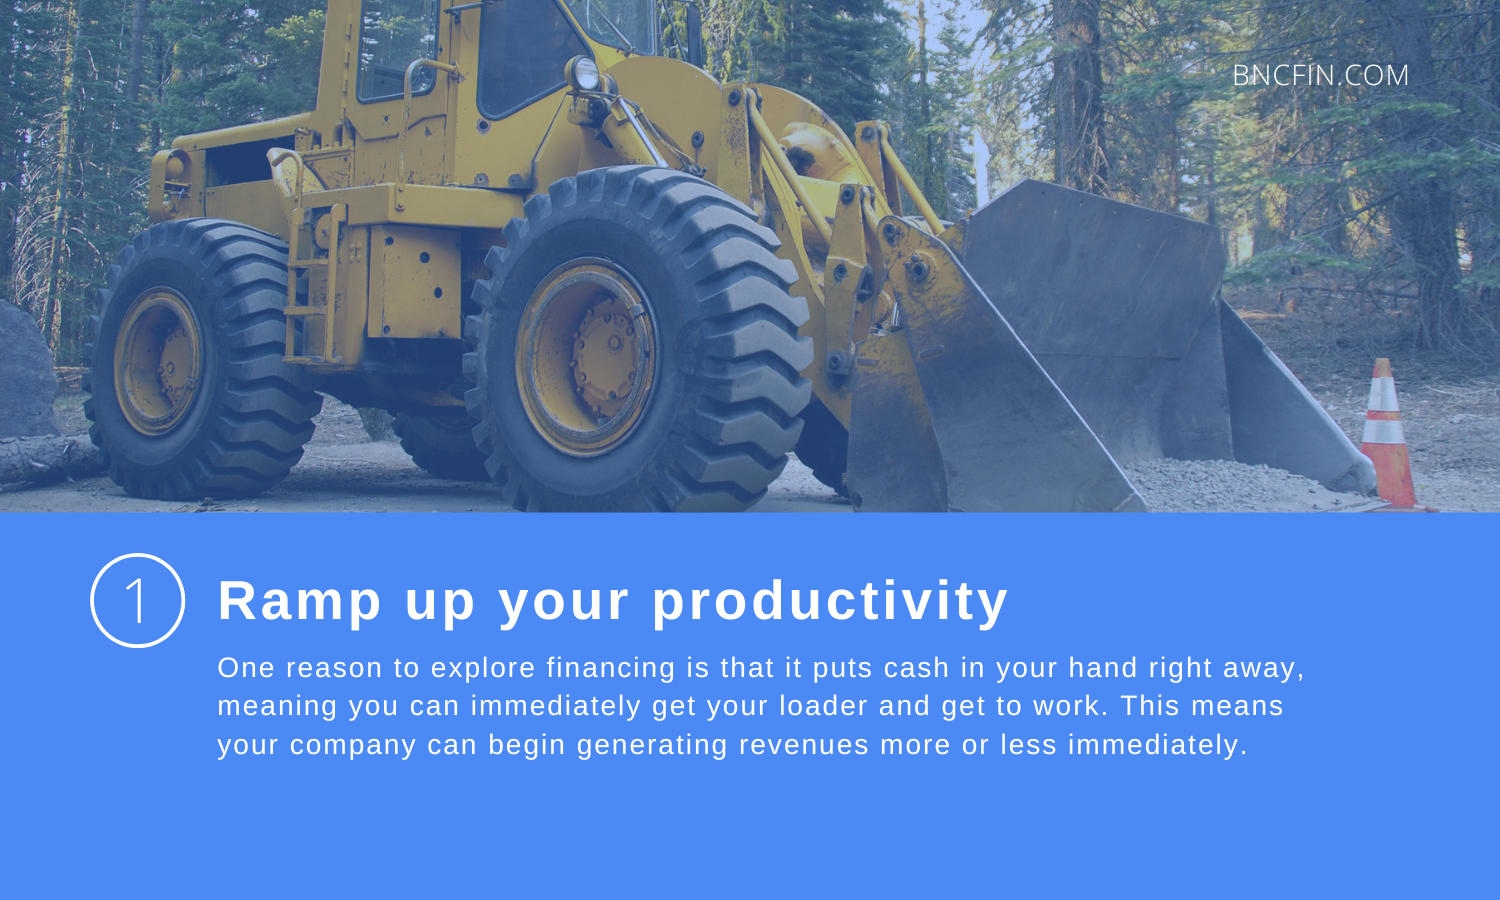 Ramp up your productivity.